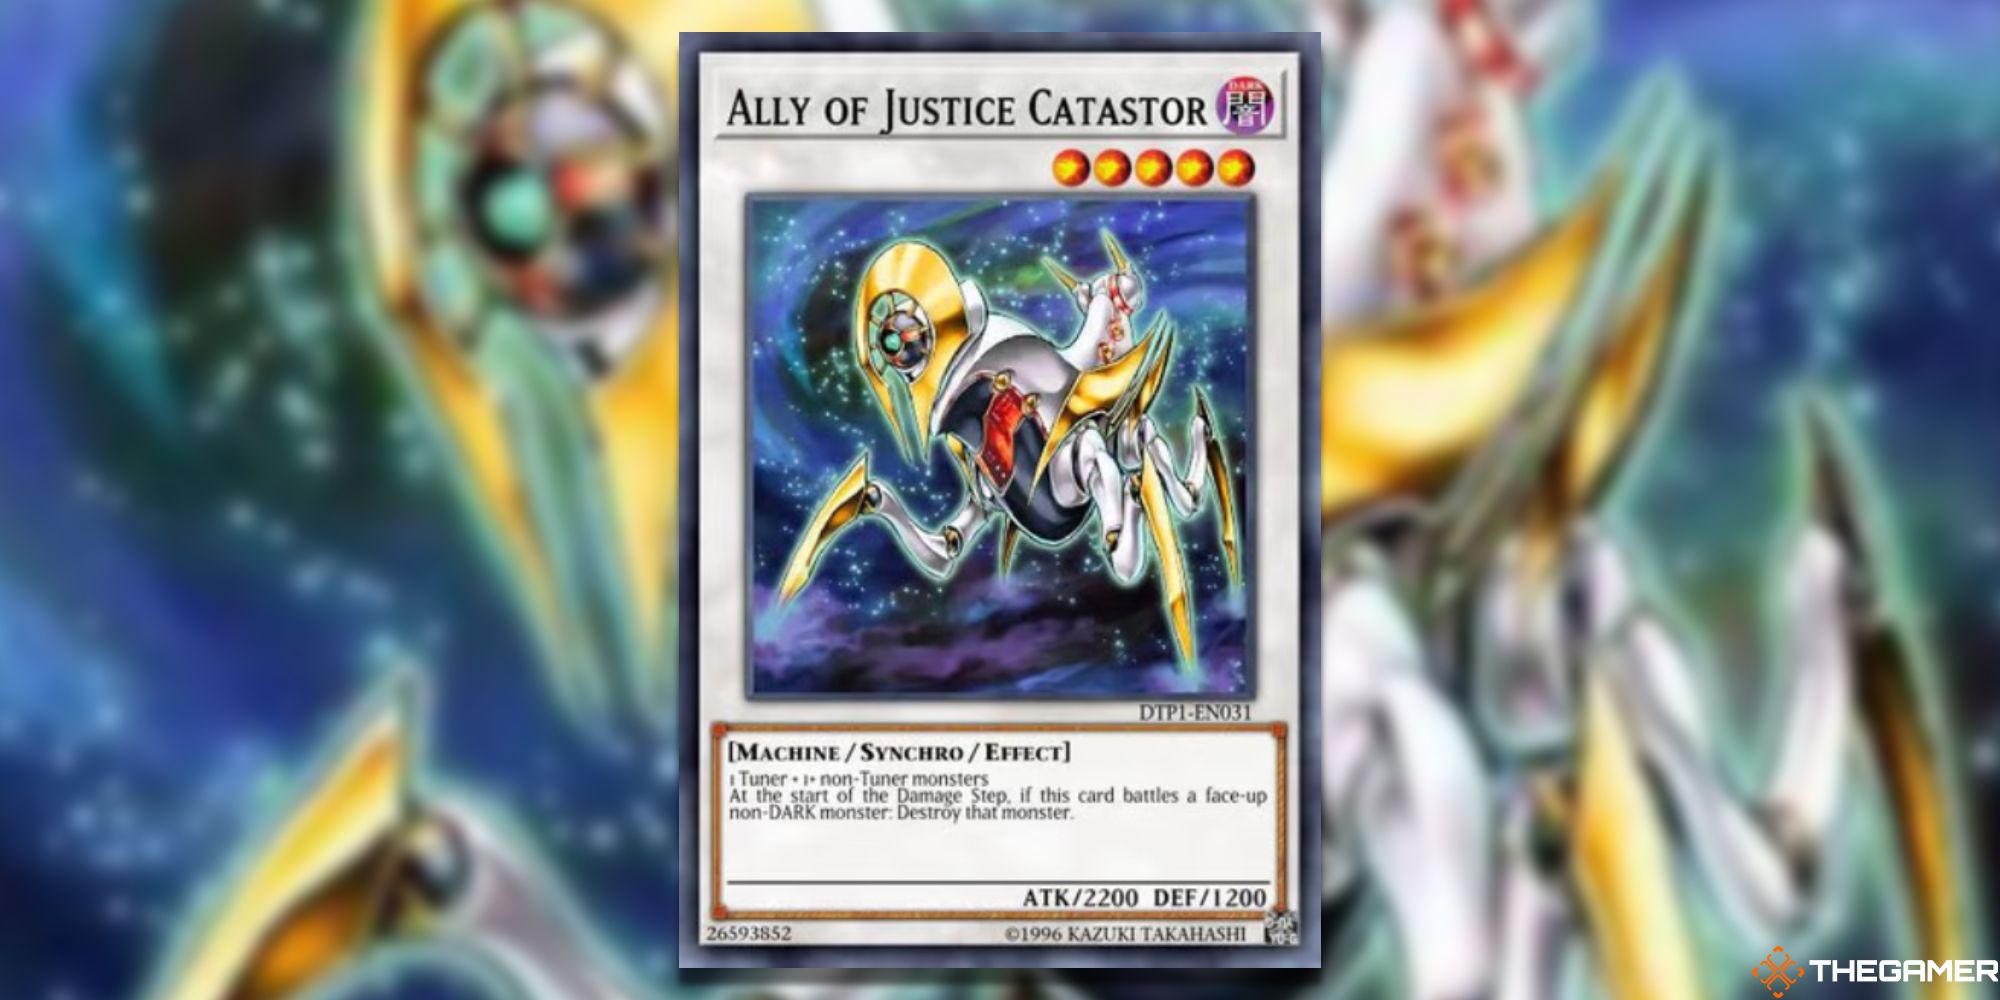 Yu-Gi-Oh! Ally Of Justice Catastor on blurred background